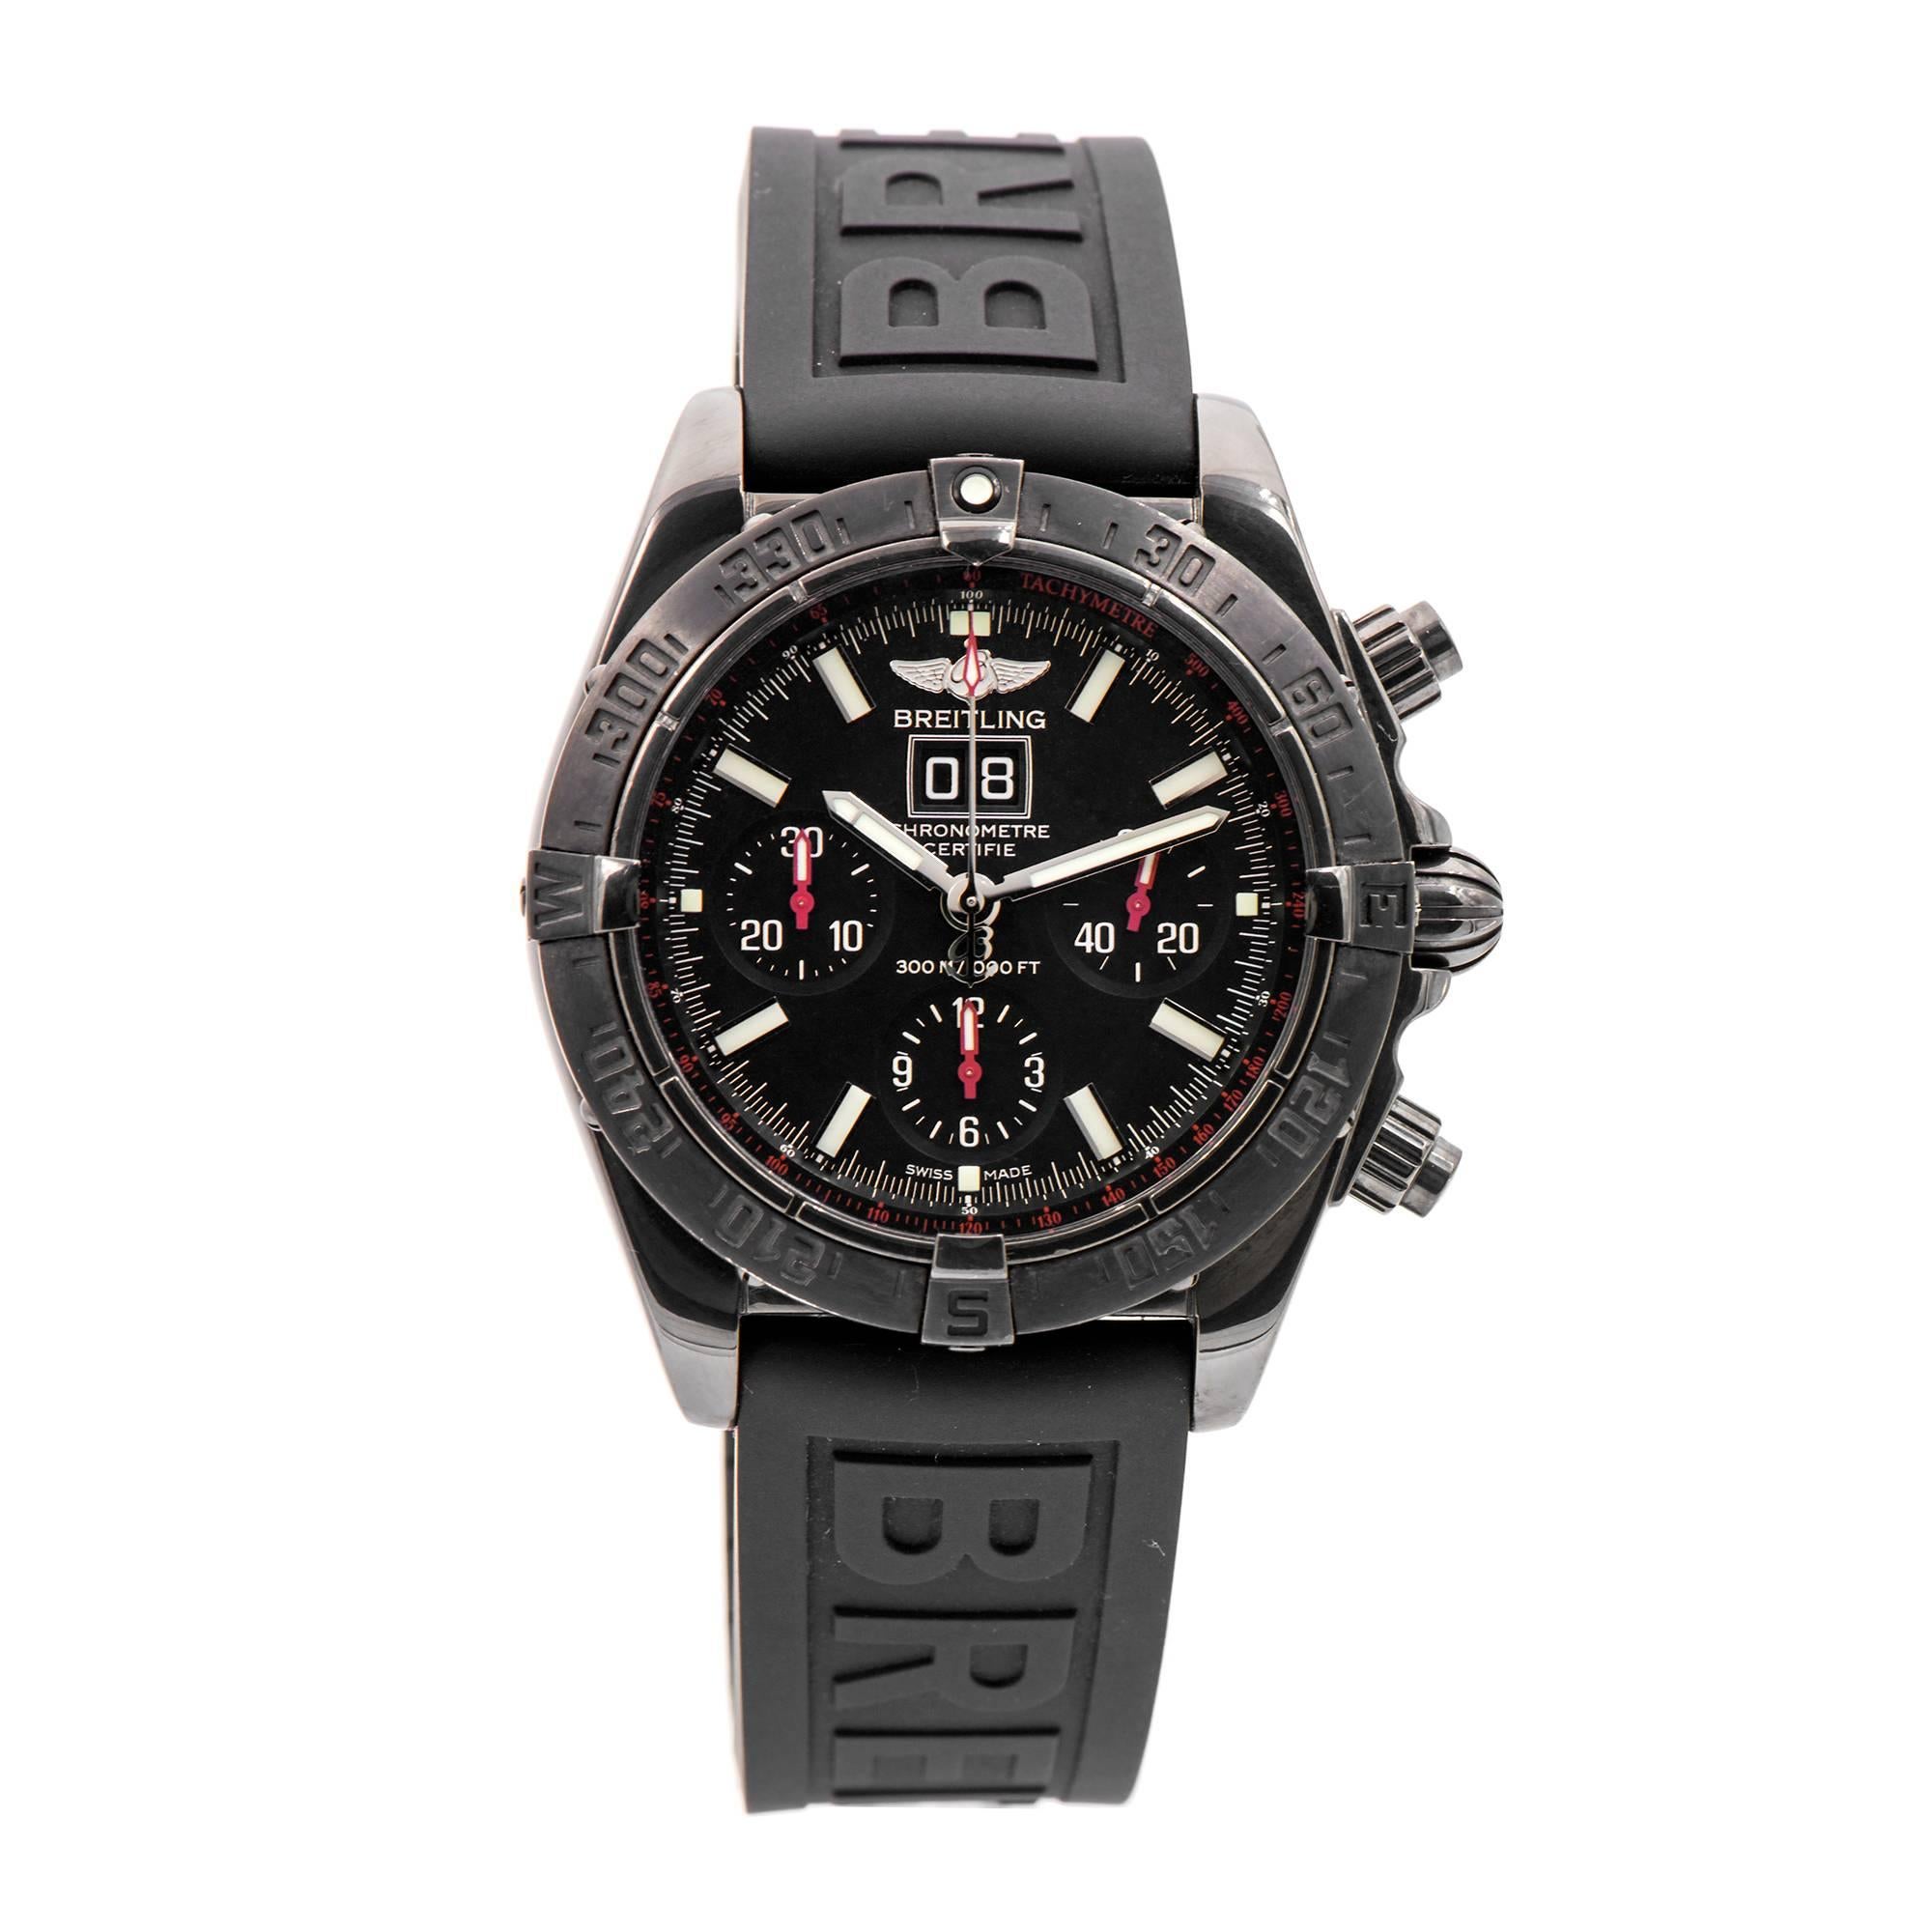 Breitling Blackbird limited edition #1145 of 2000 made. M44359 with automatic movement, 44mm black steel case, black and red dial, brand new black rubber Breitling band. Functions include hours, minutes, small seconds, date chronograph and